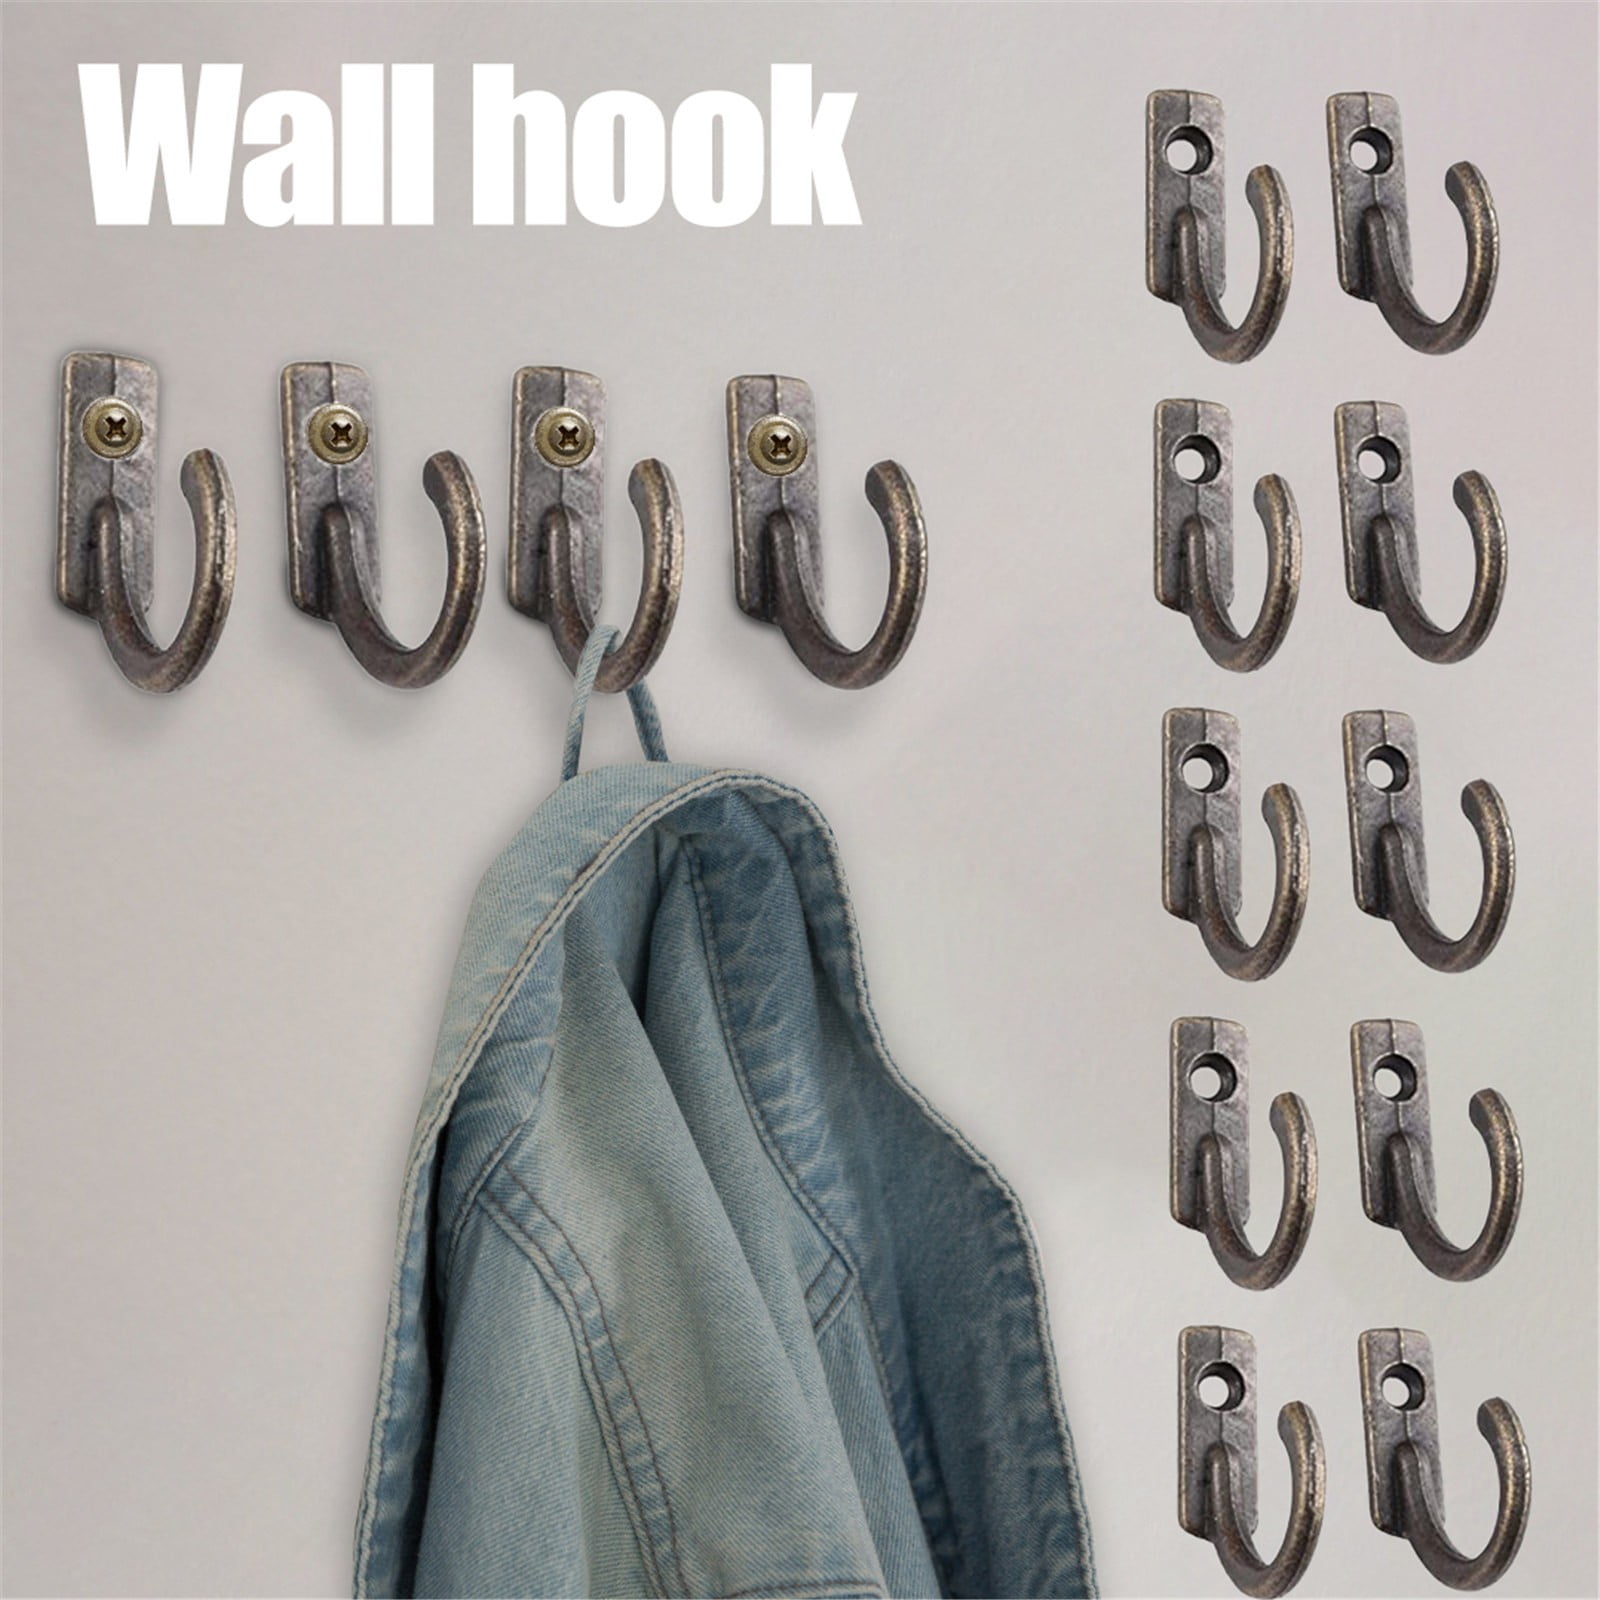 Details about   Retro Bathroom Kitchen Coat Clothes Towel Wall Hooks Household Holder Organizer 